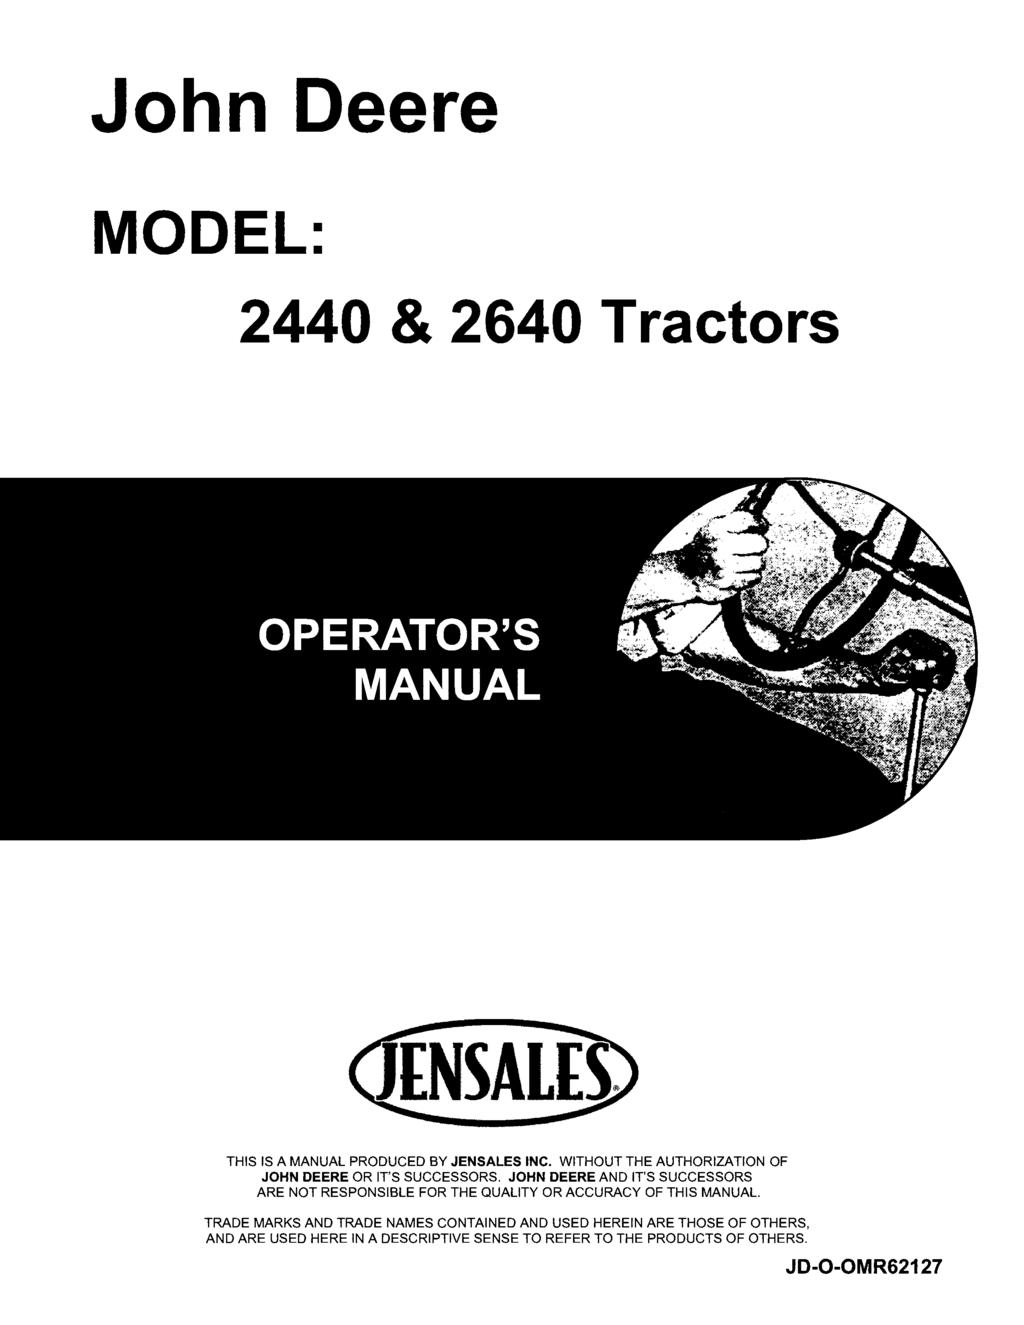 John Deere MODEL: 2440 & 2640 Tractors THIS IS A MANUAL PRODUCED BY JENSALES INC. WITHOUT THE AUTHORIZATION OF JOHN DEERE OR IT'S SUCCESSORS.